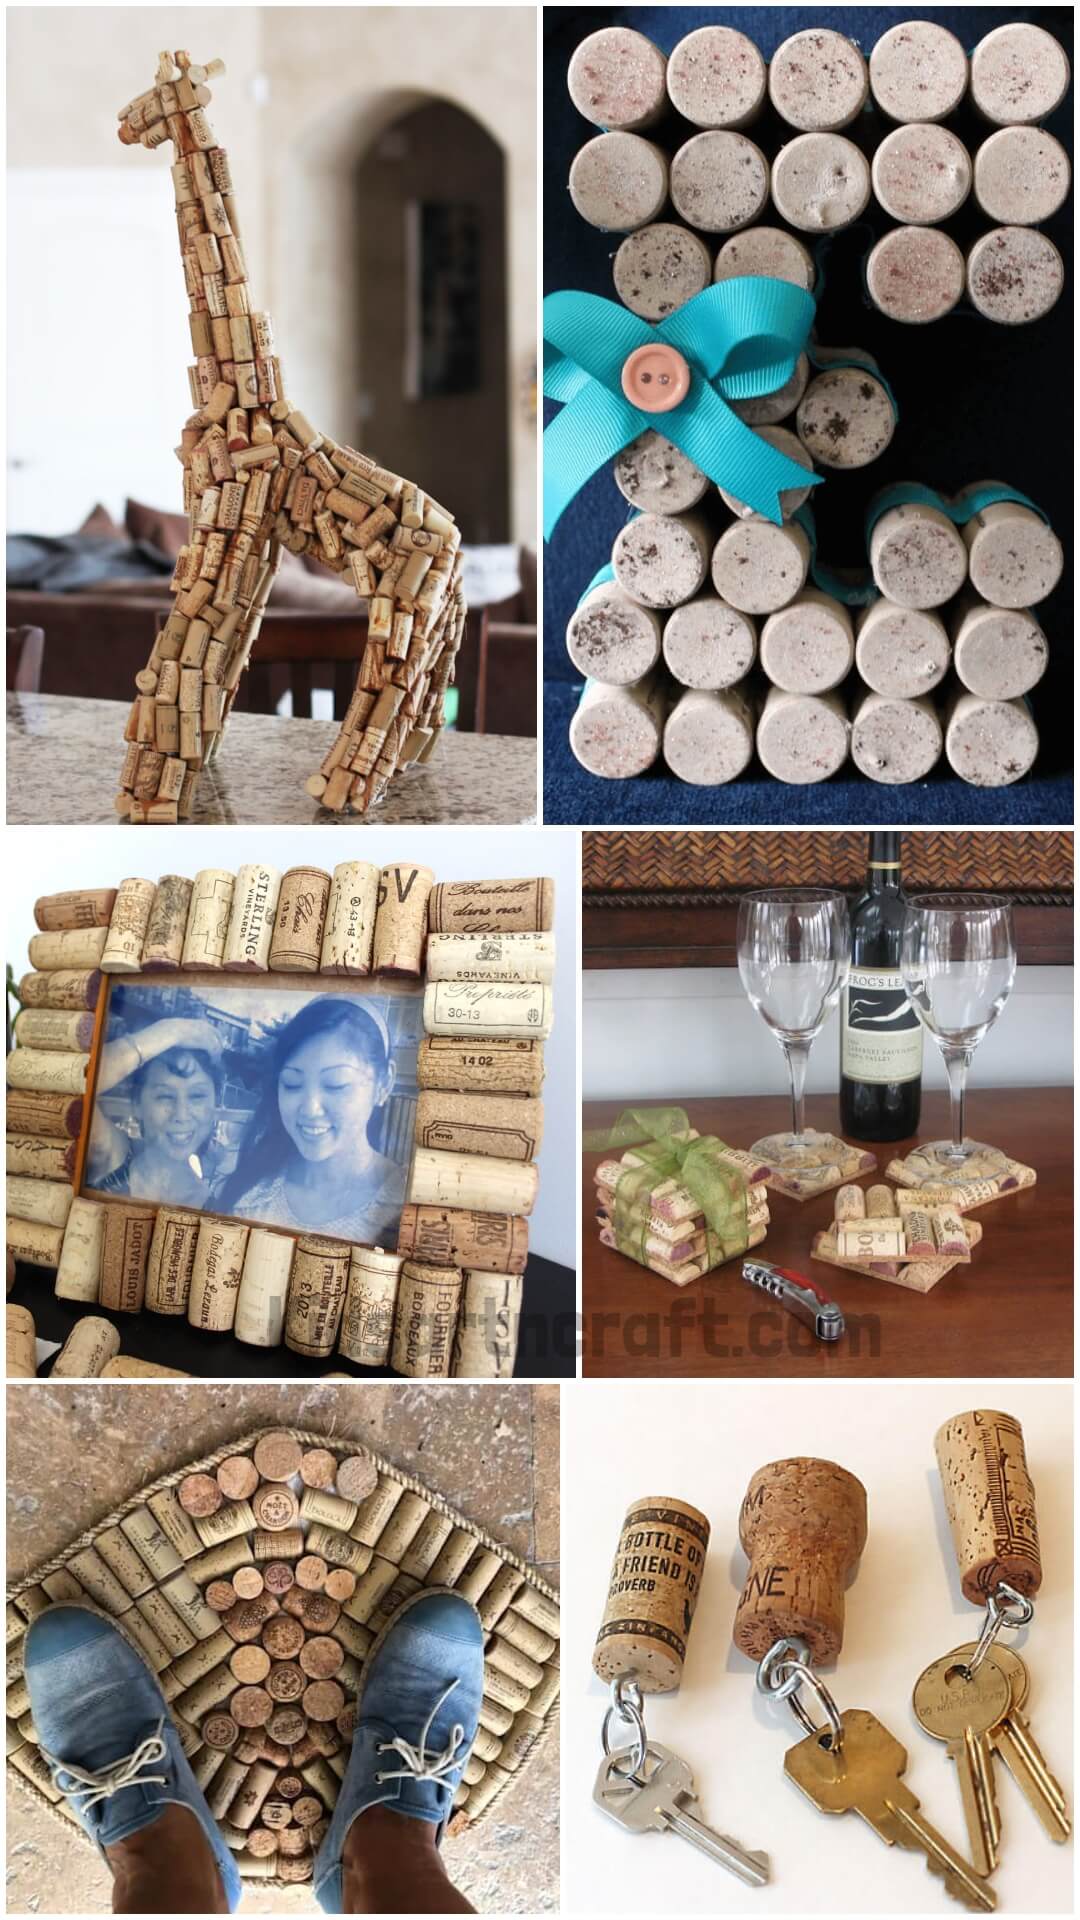  Cork Crafts For Gifts